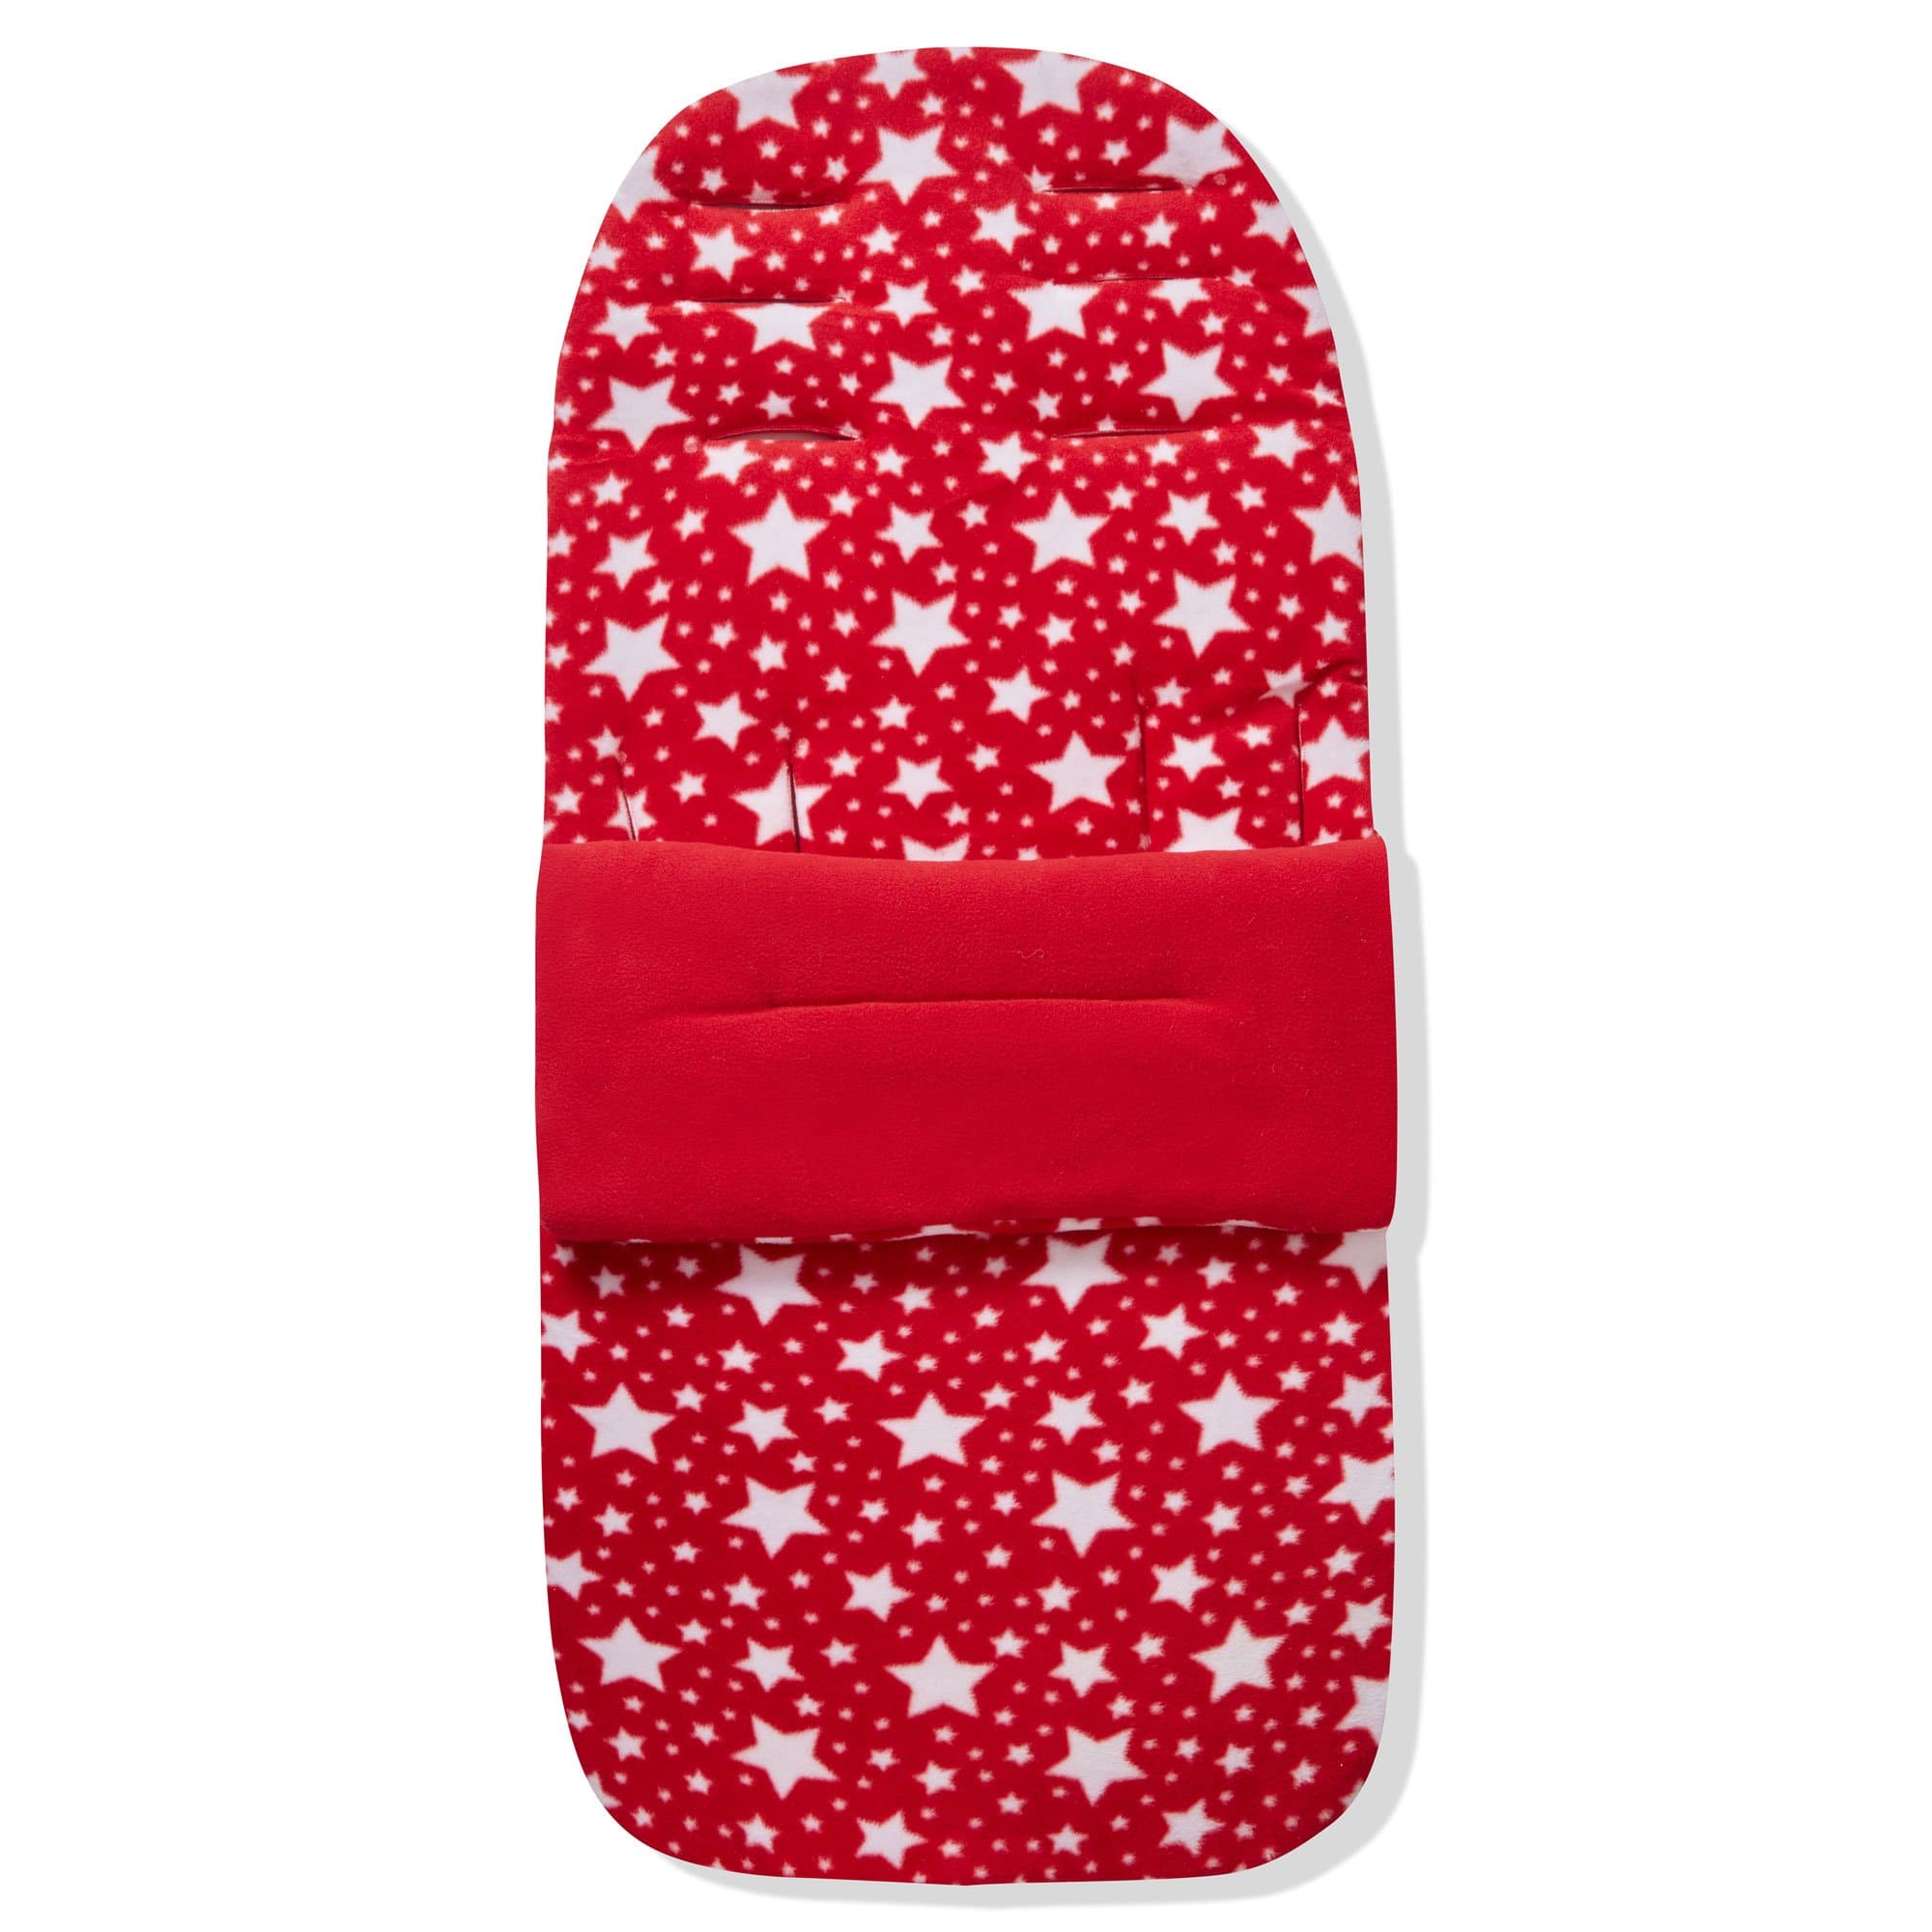 Fleece Footmuff / Cosy Toes Compatible with Kiddicouture - Red Star / Fits All Models | For Your Little One